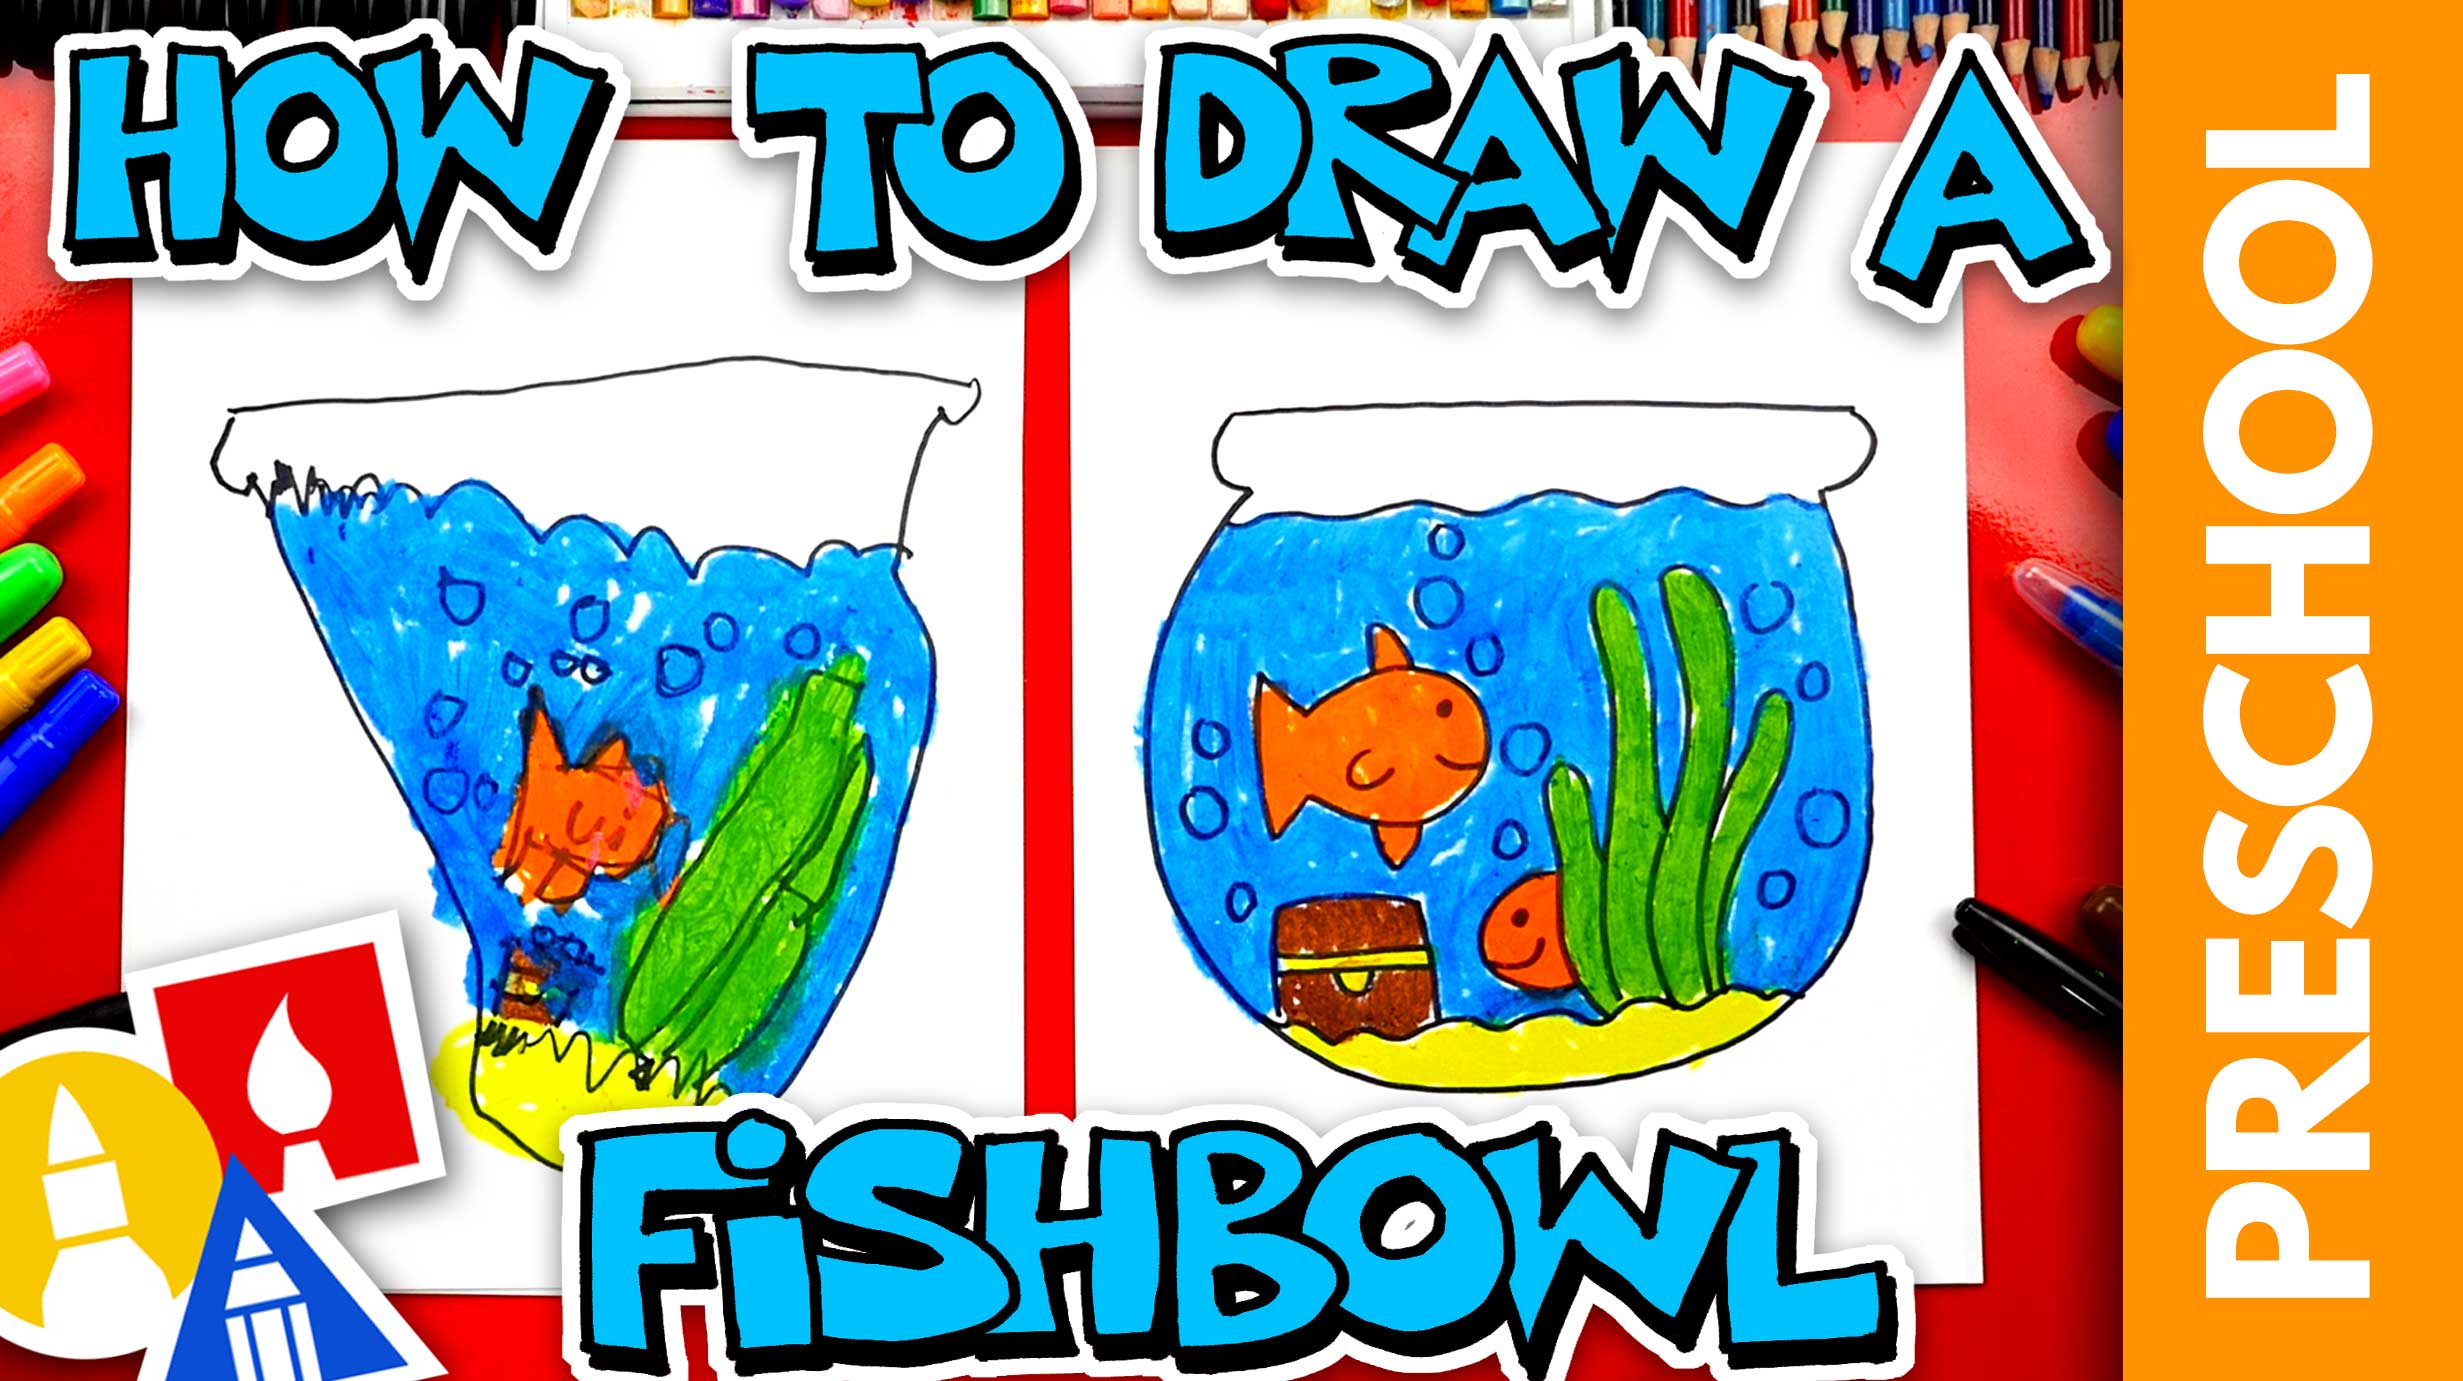 How to Draw Fish Bowls Finished Tutorial | How to Draw Step by Step Drawing  Tutorials